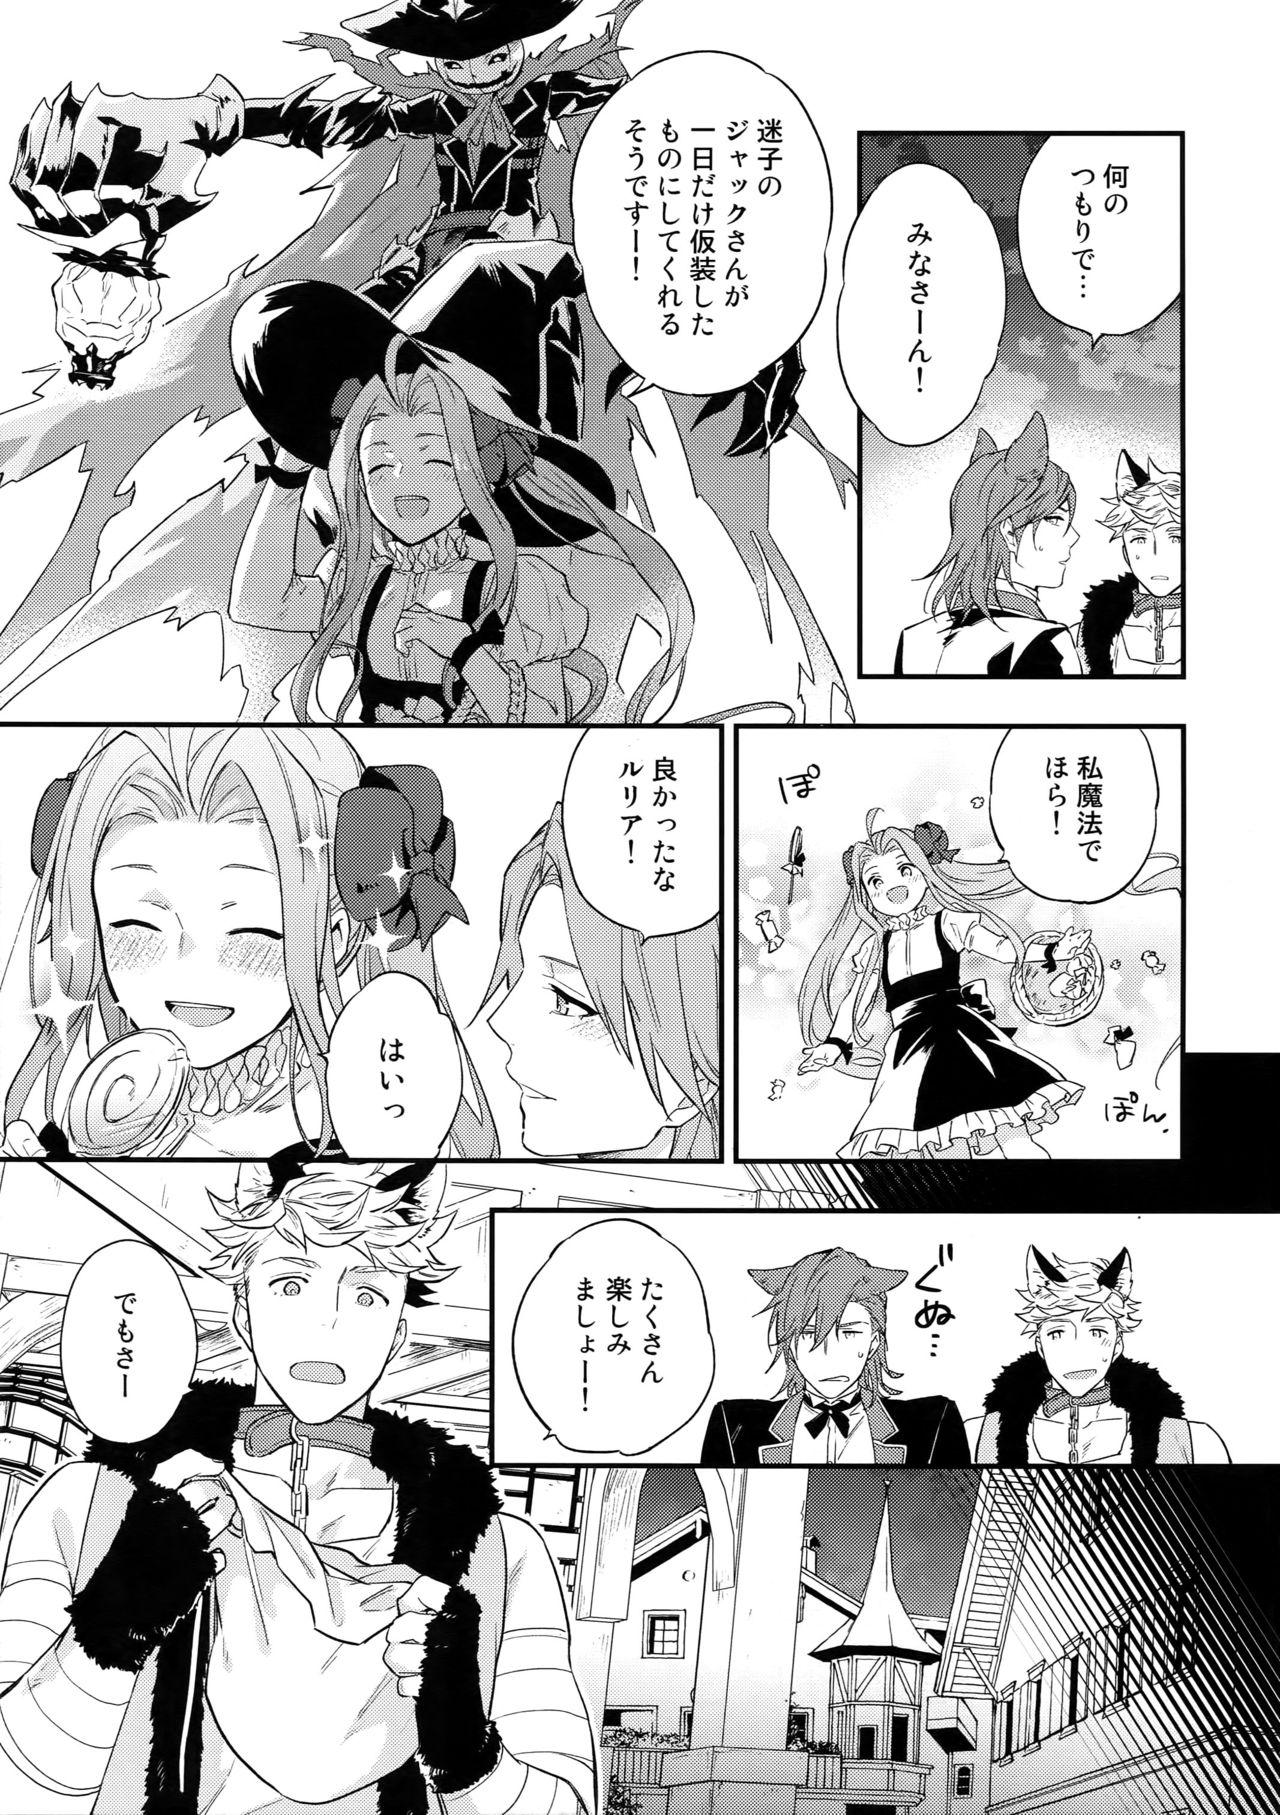 Top Enjoy a Spooky Night! - Granblue fantasy Fitness - Page 6